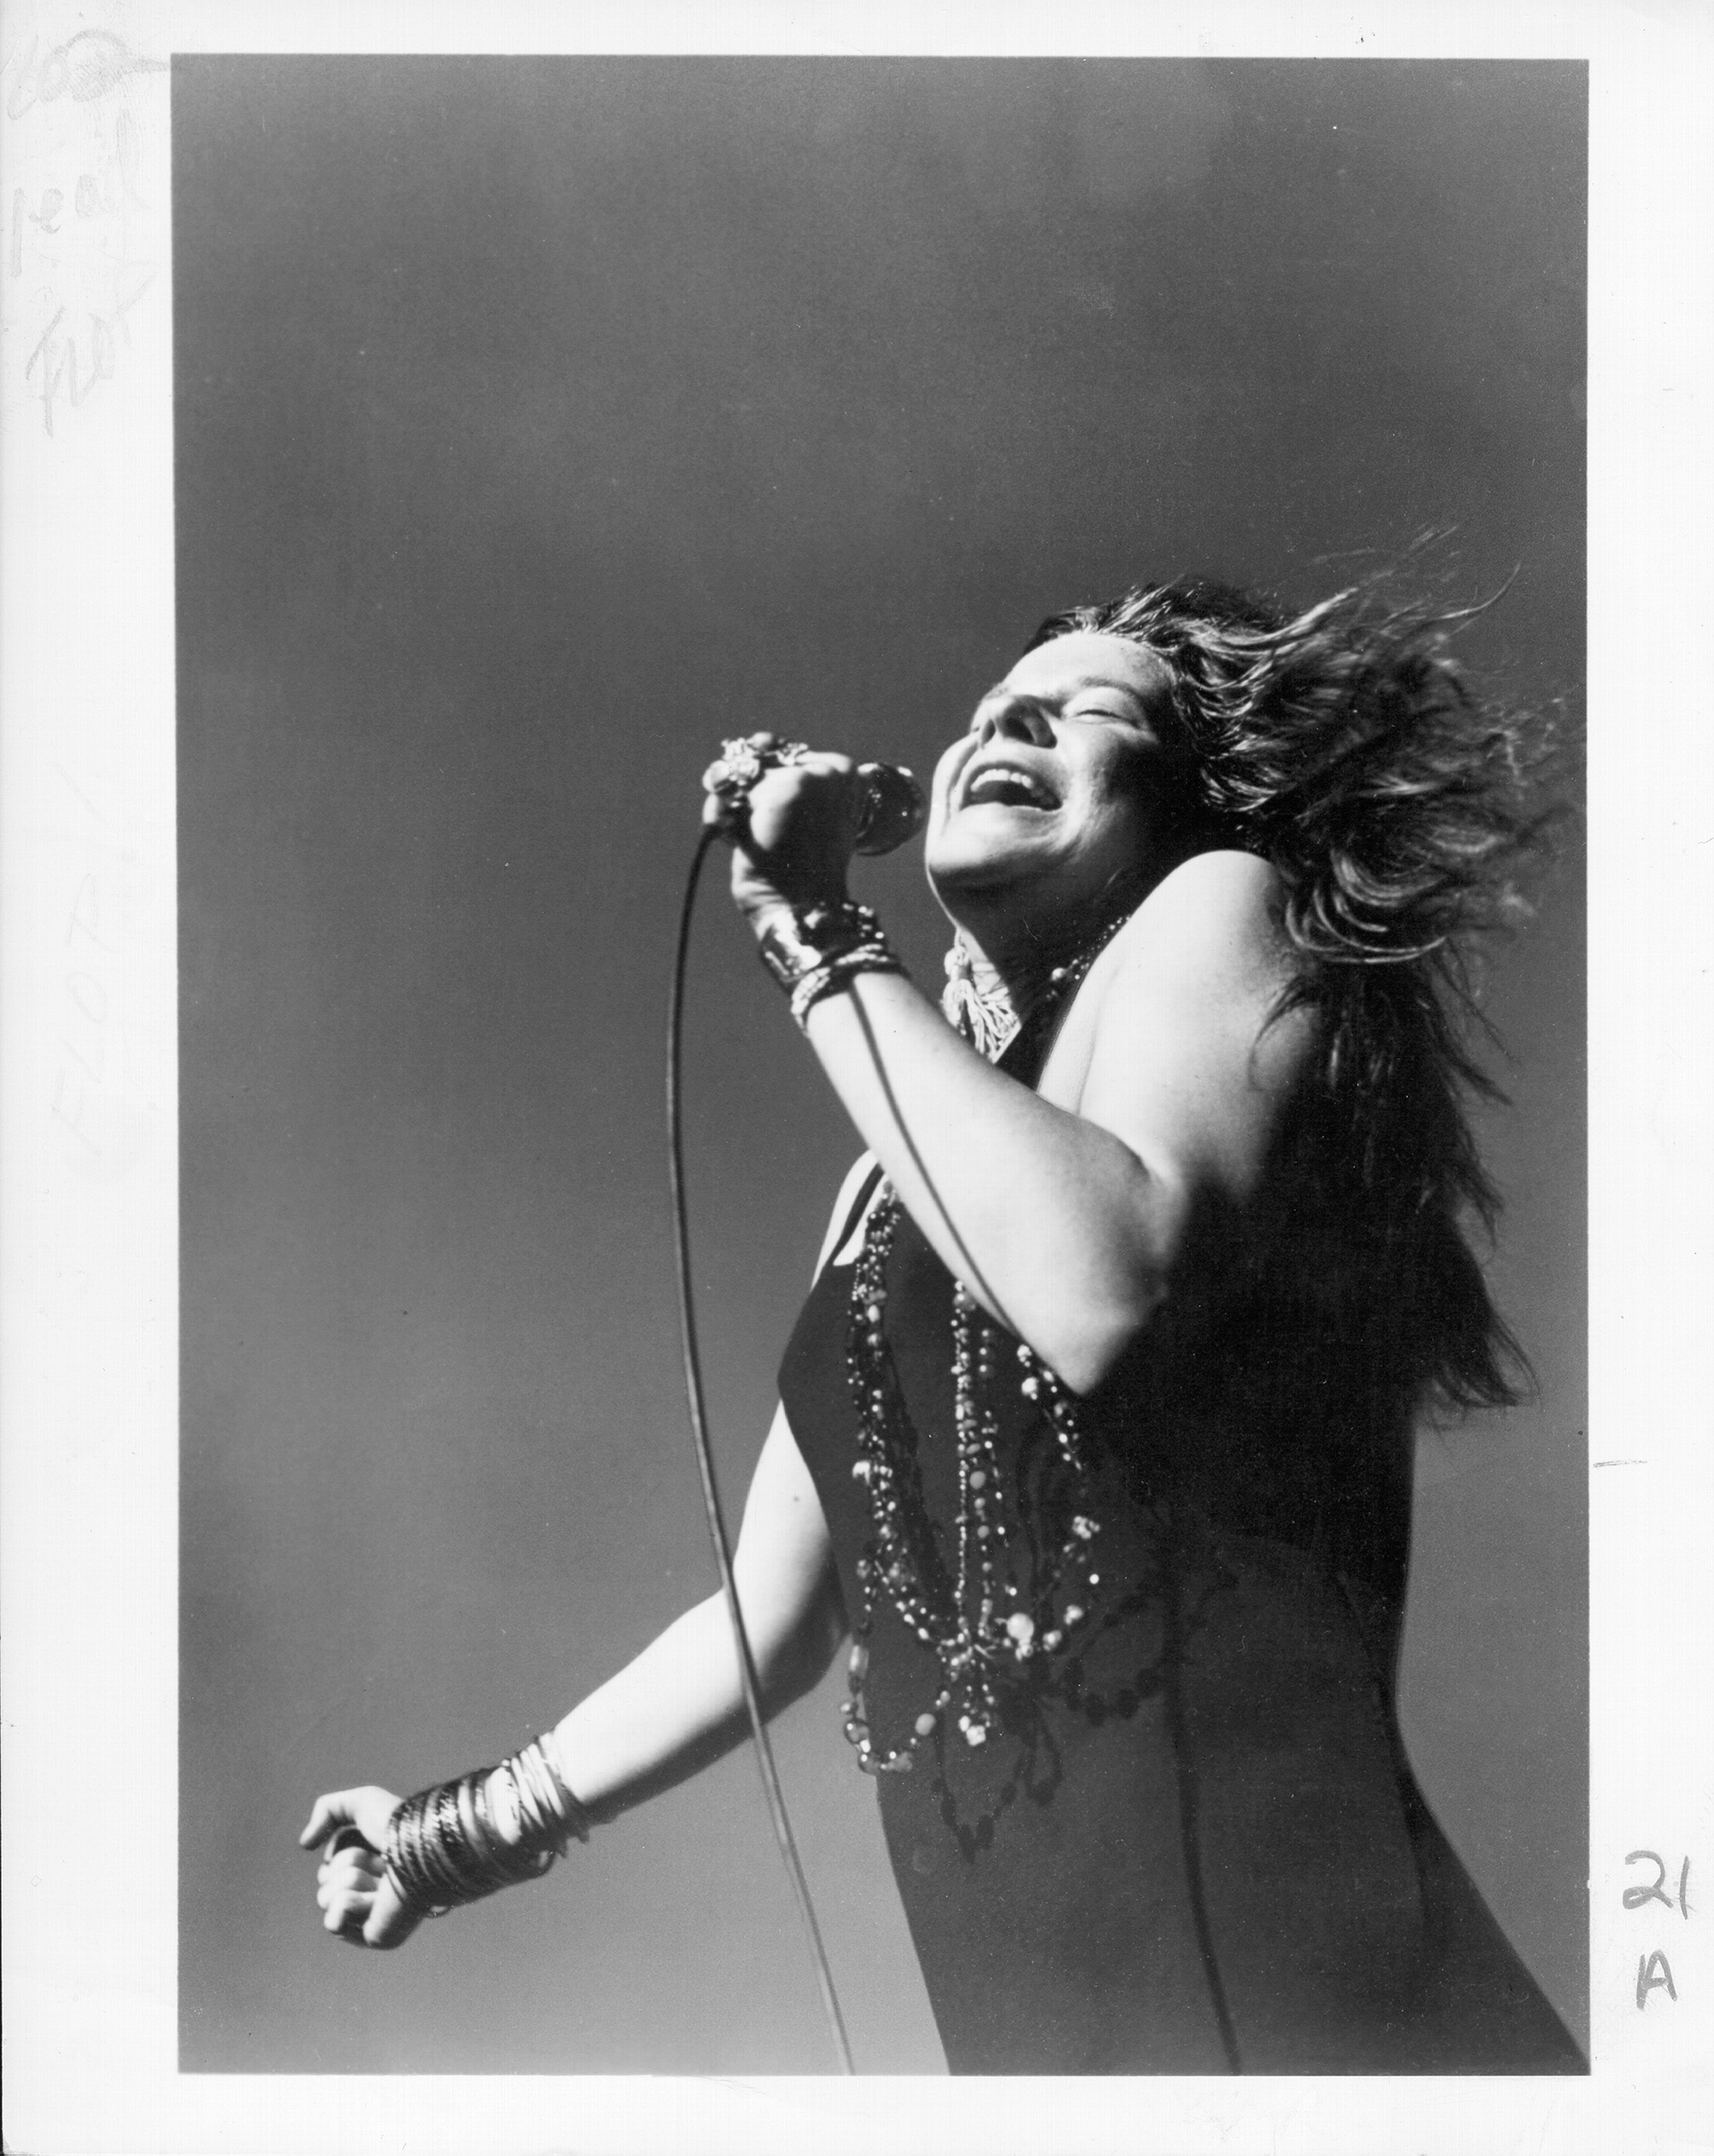 Singer Janis Joplin performs onstage at the Santa Clara County Fairgrounds for the Northern California Folk-Rock Festival on May 18, 1968 in San Jose, California. (Michael Ochs Archives)